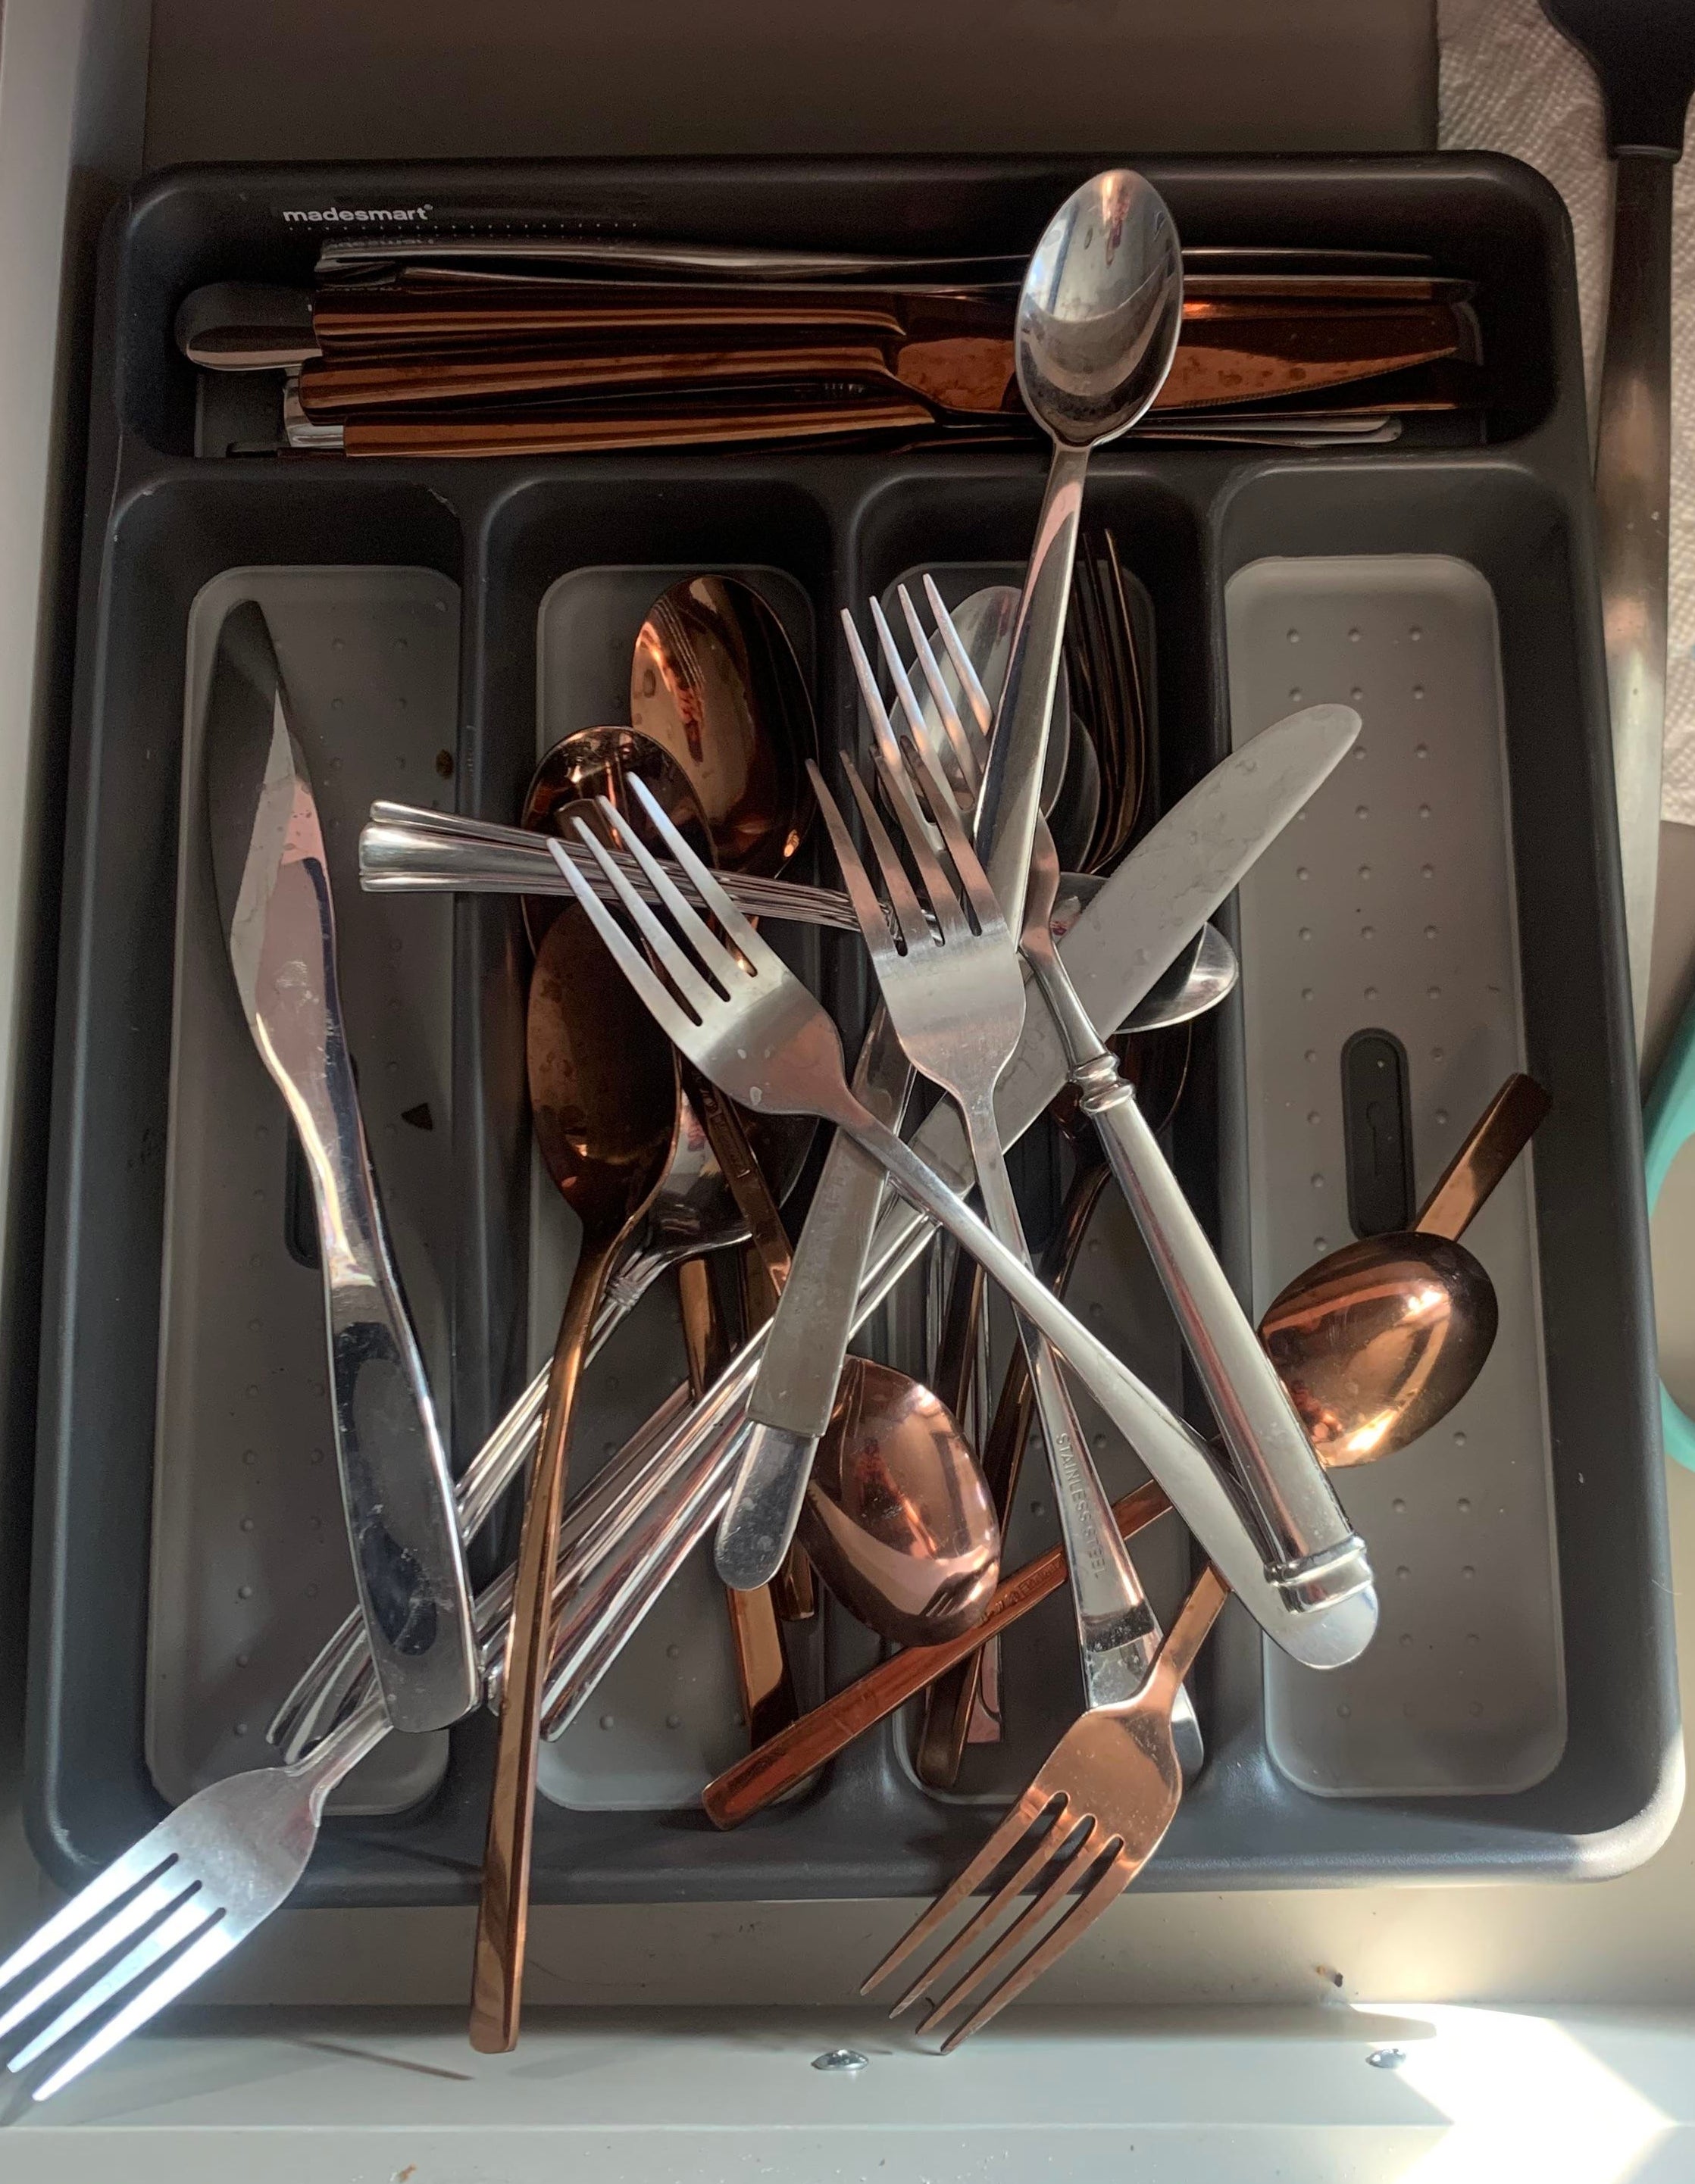 A kitchen drawer with disorganized cutlery and scissors